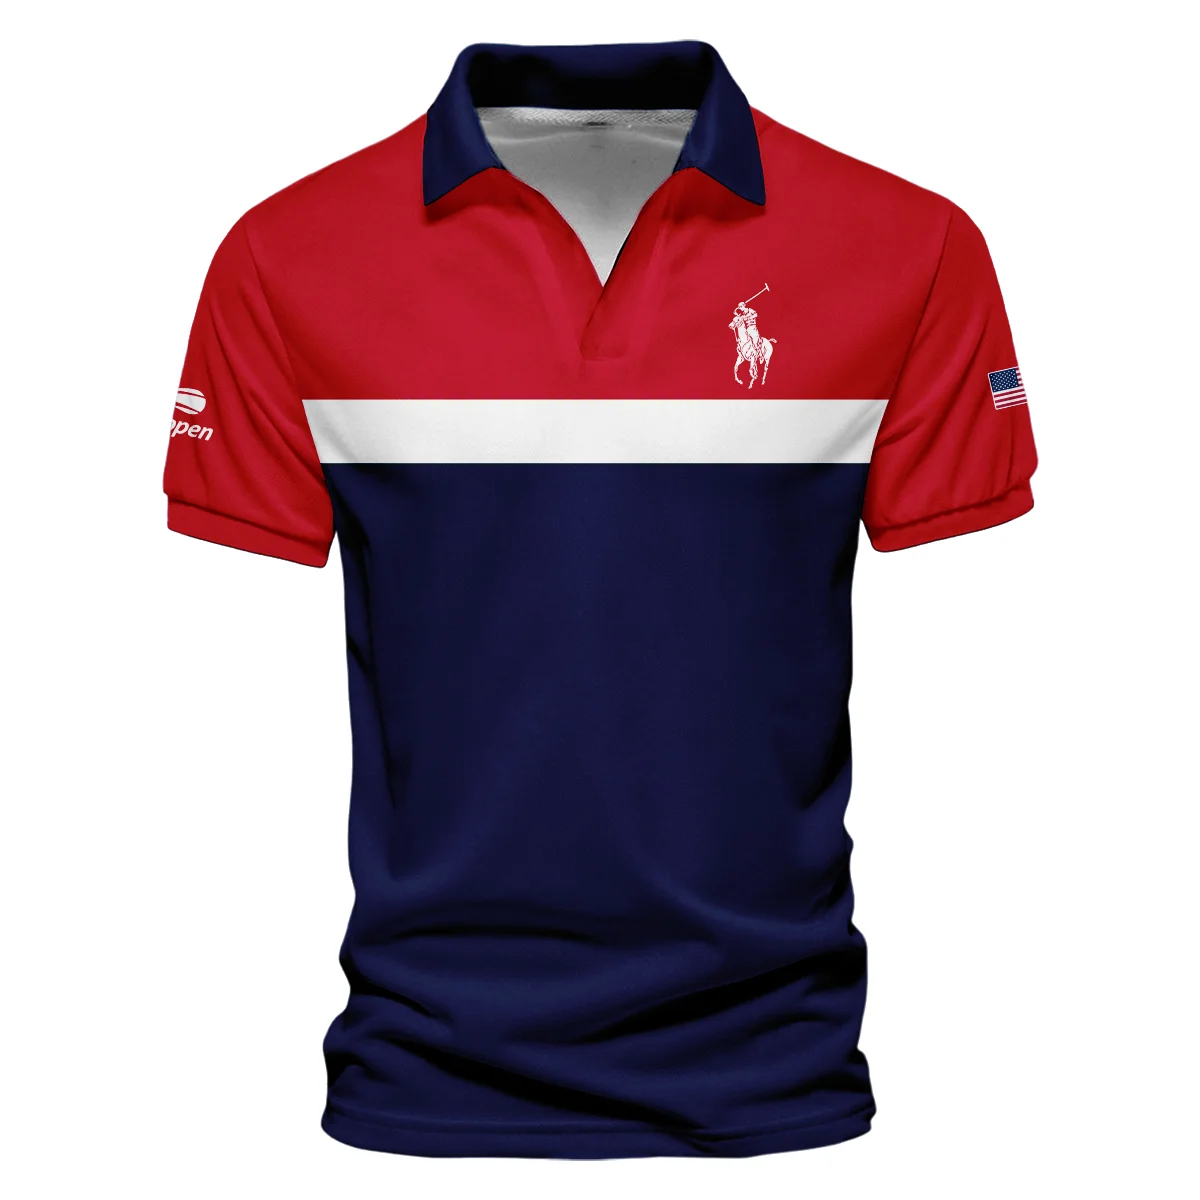 Ralph Lauren Blue Red White Background US Open Tennis Champions Vneck Polo Shirt Style Classic Polo Shirt For Men